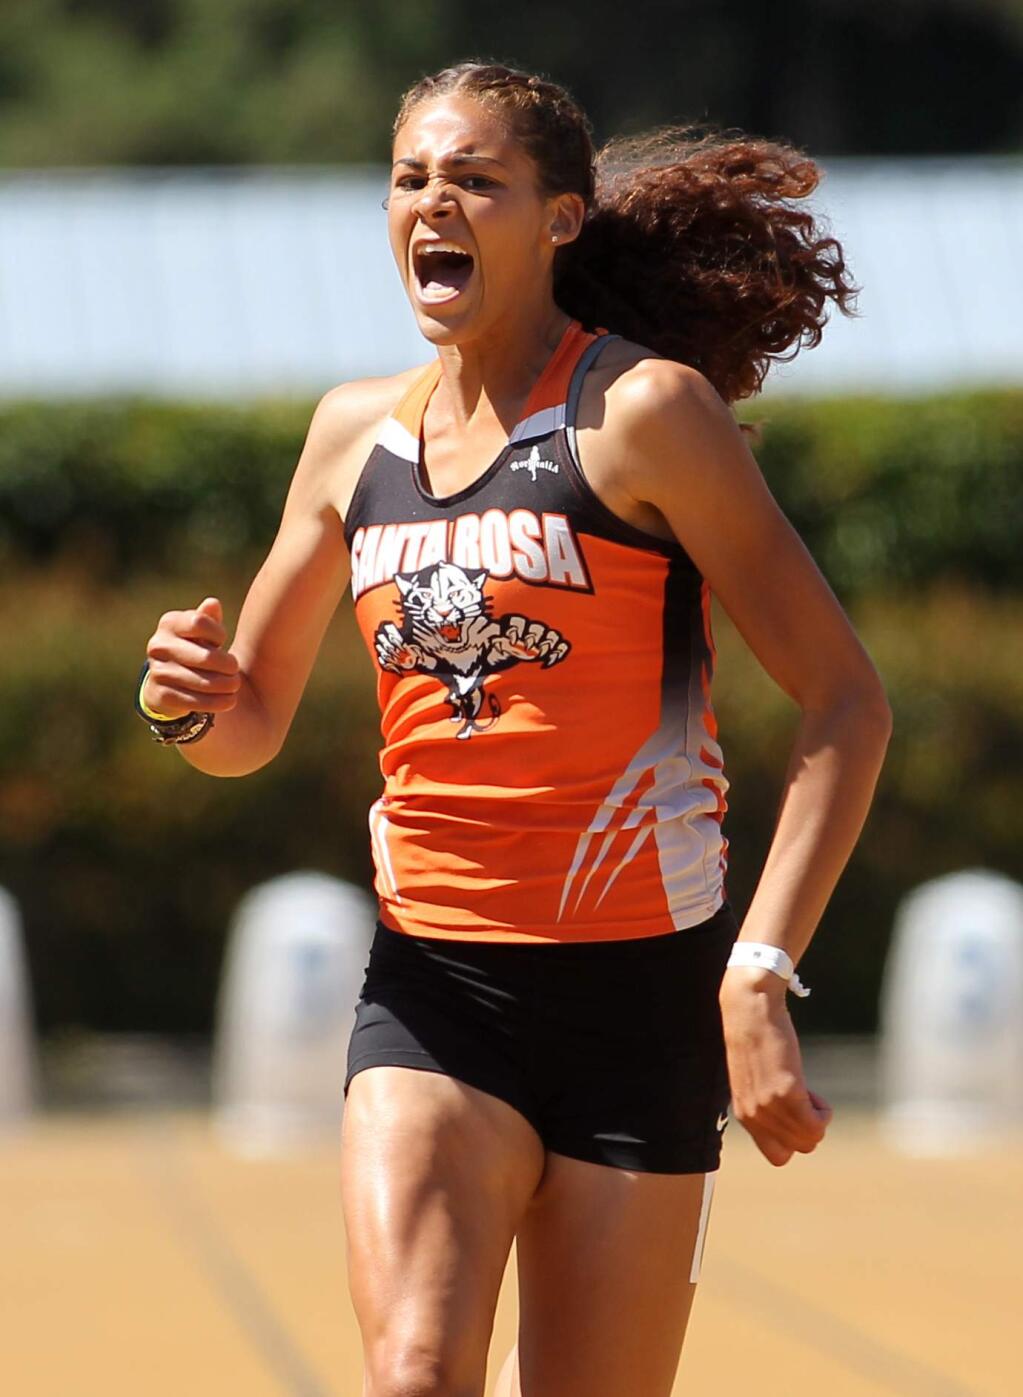 Kristen Carter of Santa Rosa High yells as she finishes second place in the girls 200-meter dash during the track and field NCS Meet of Champions at UC Berkeley's Edwards Stadium, on Saturday, May 26, 2018. (Photo by Darryl Bush / For The Press Democrat)